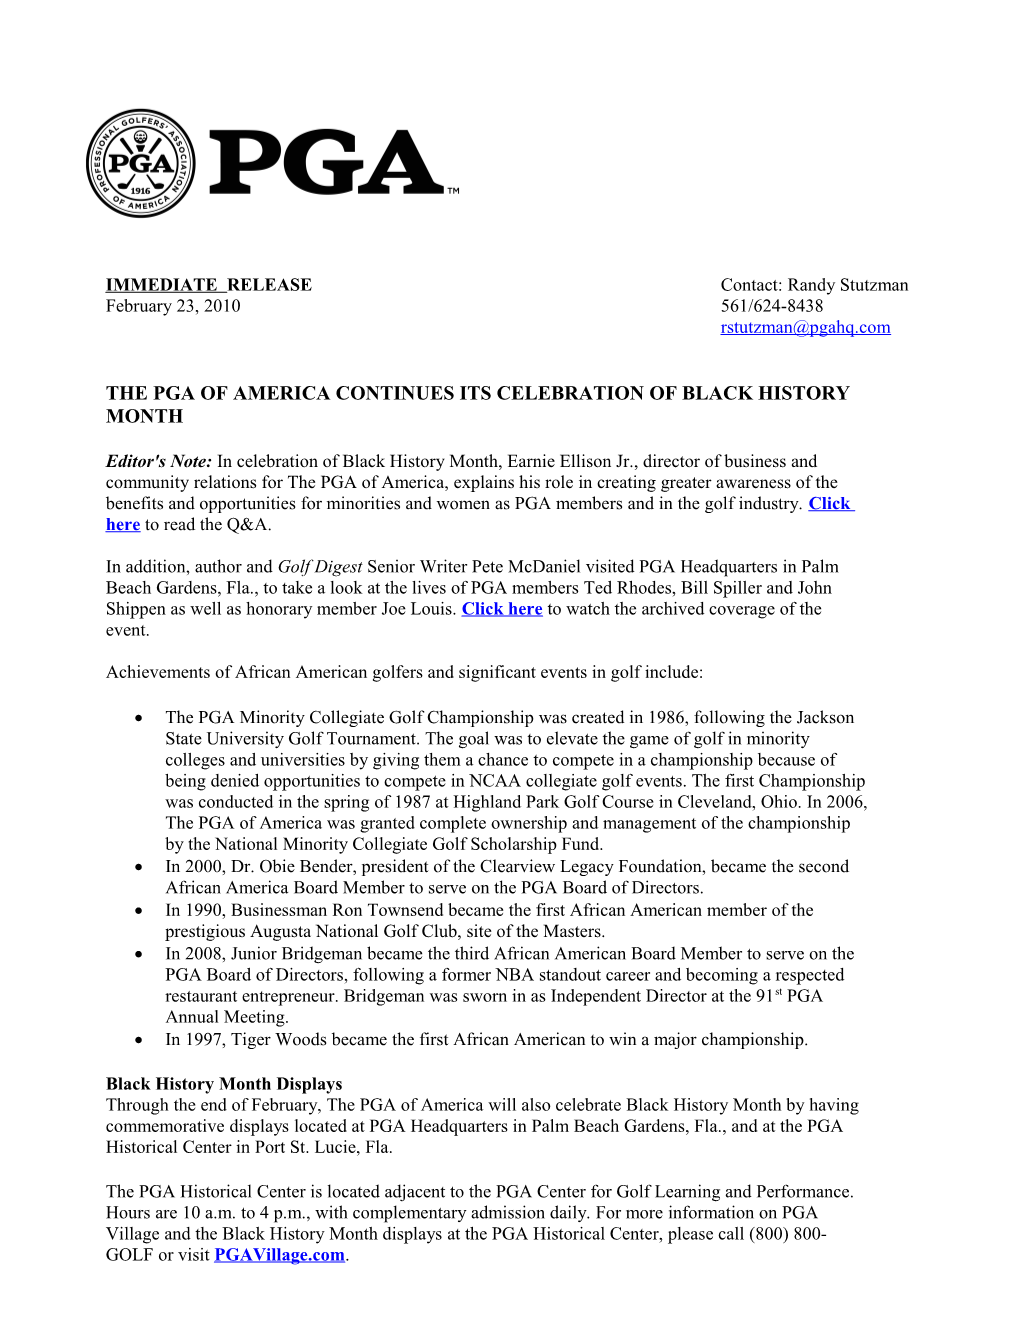 The Pga of America Continues Its Celebration of Black History Month